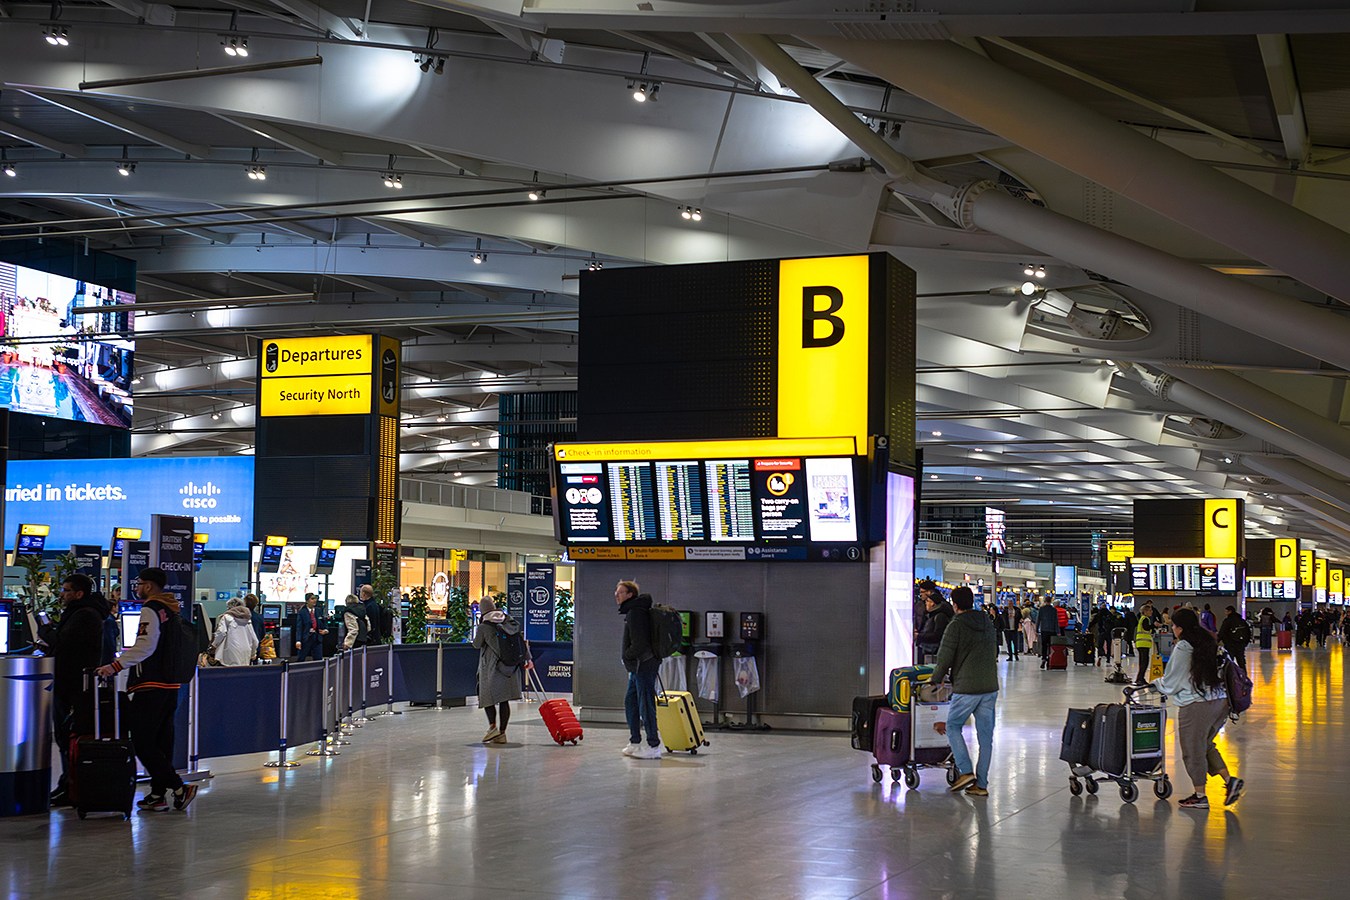 Heathrow airport will be hit by Border Force strikes over the Easter holidays